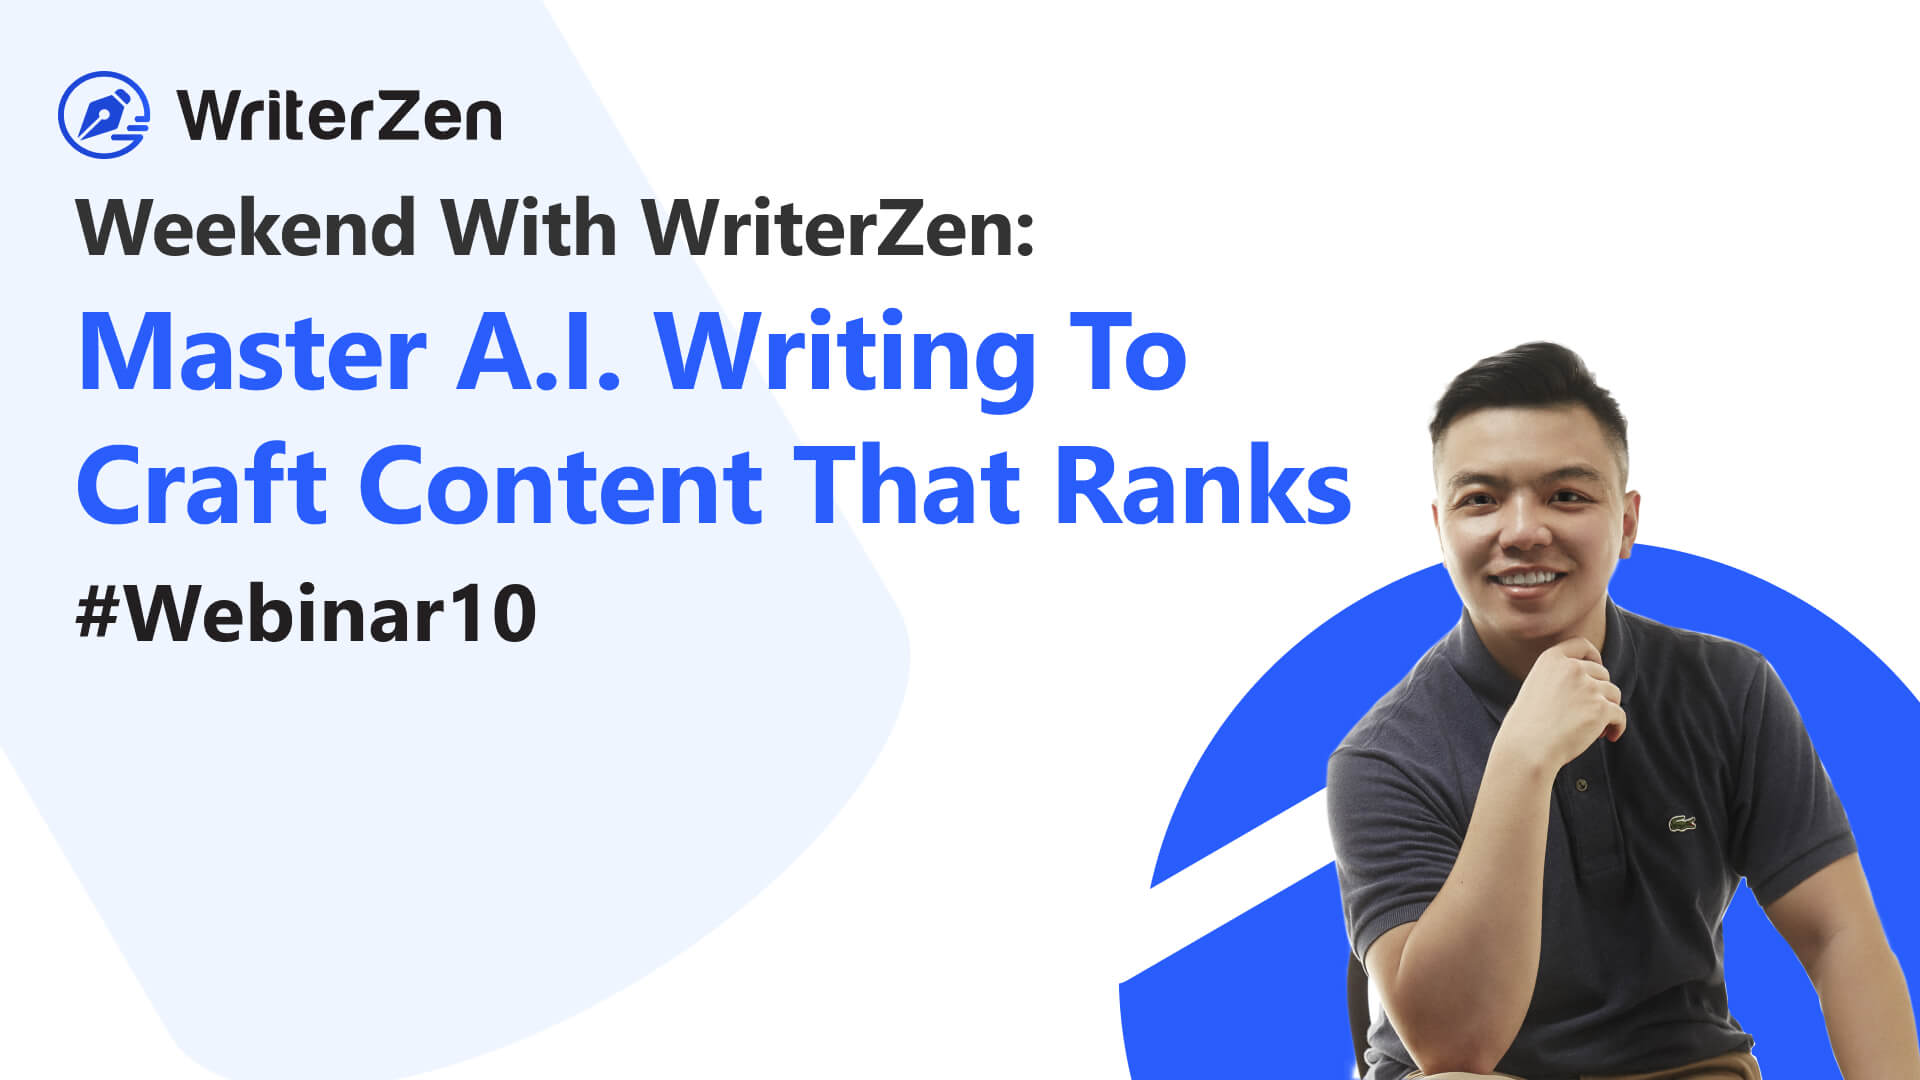 Weekend With WriterZen: Master A.I. Writing To Craft Content That Ranks